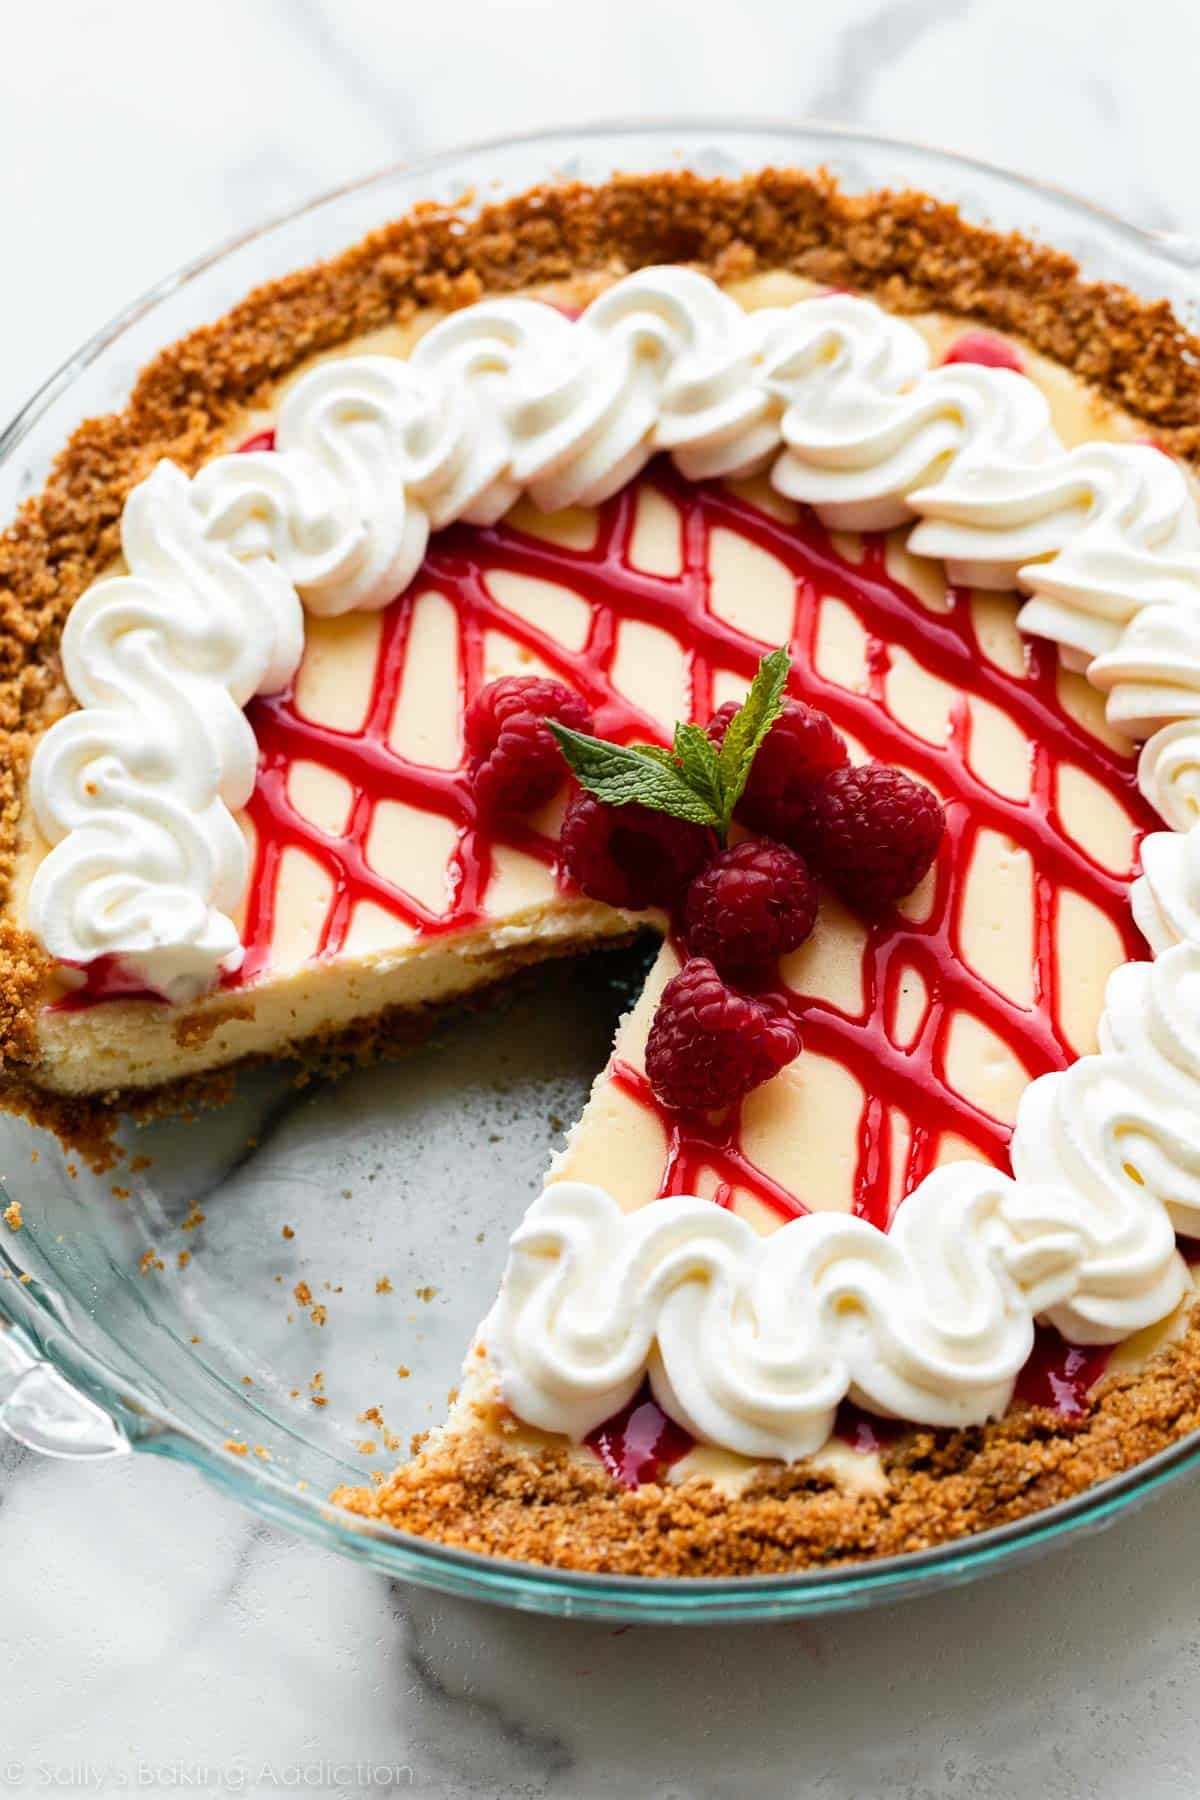 whipped cream and raspberry sauce topped cheesecake pie with 1 slice removed.